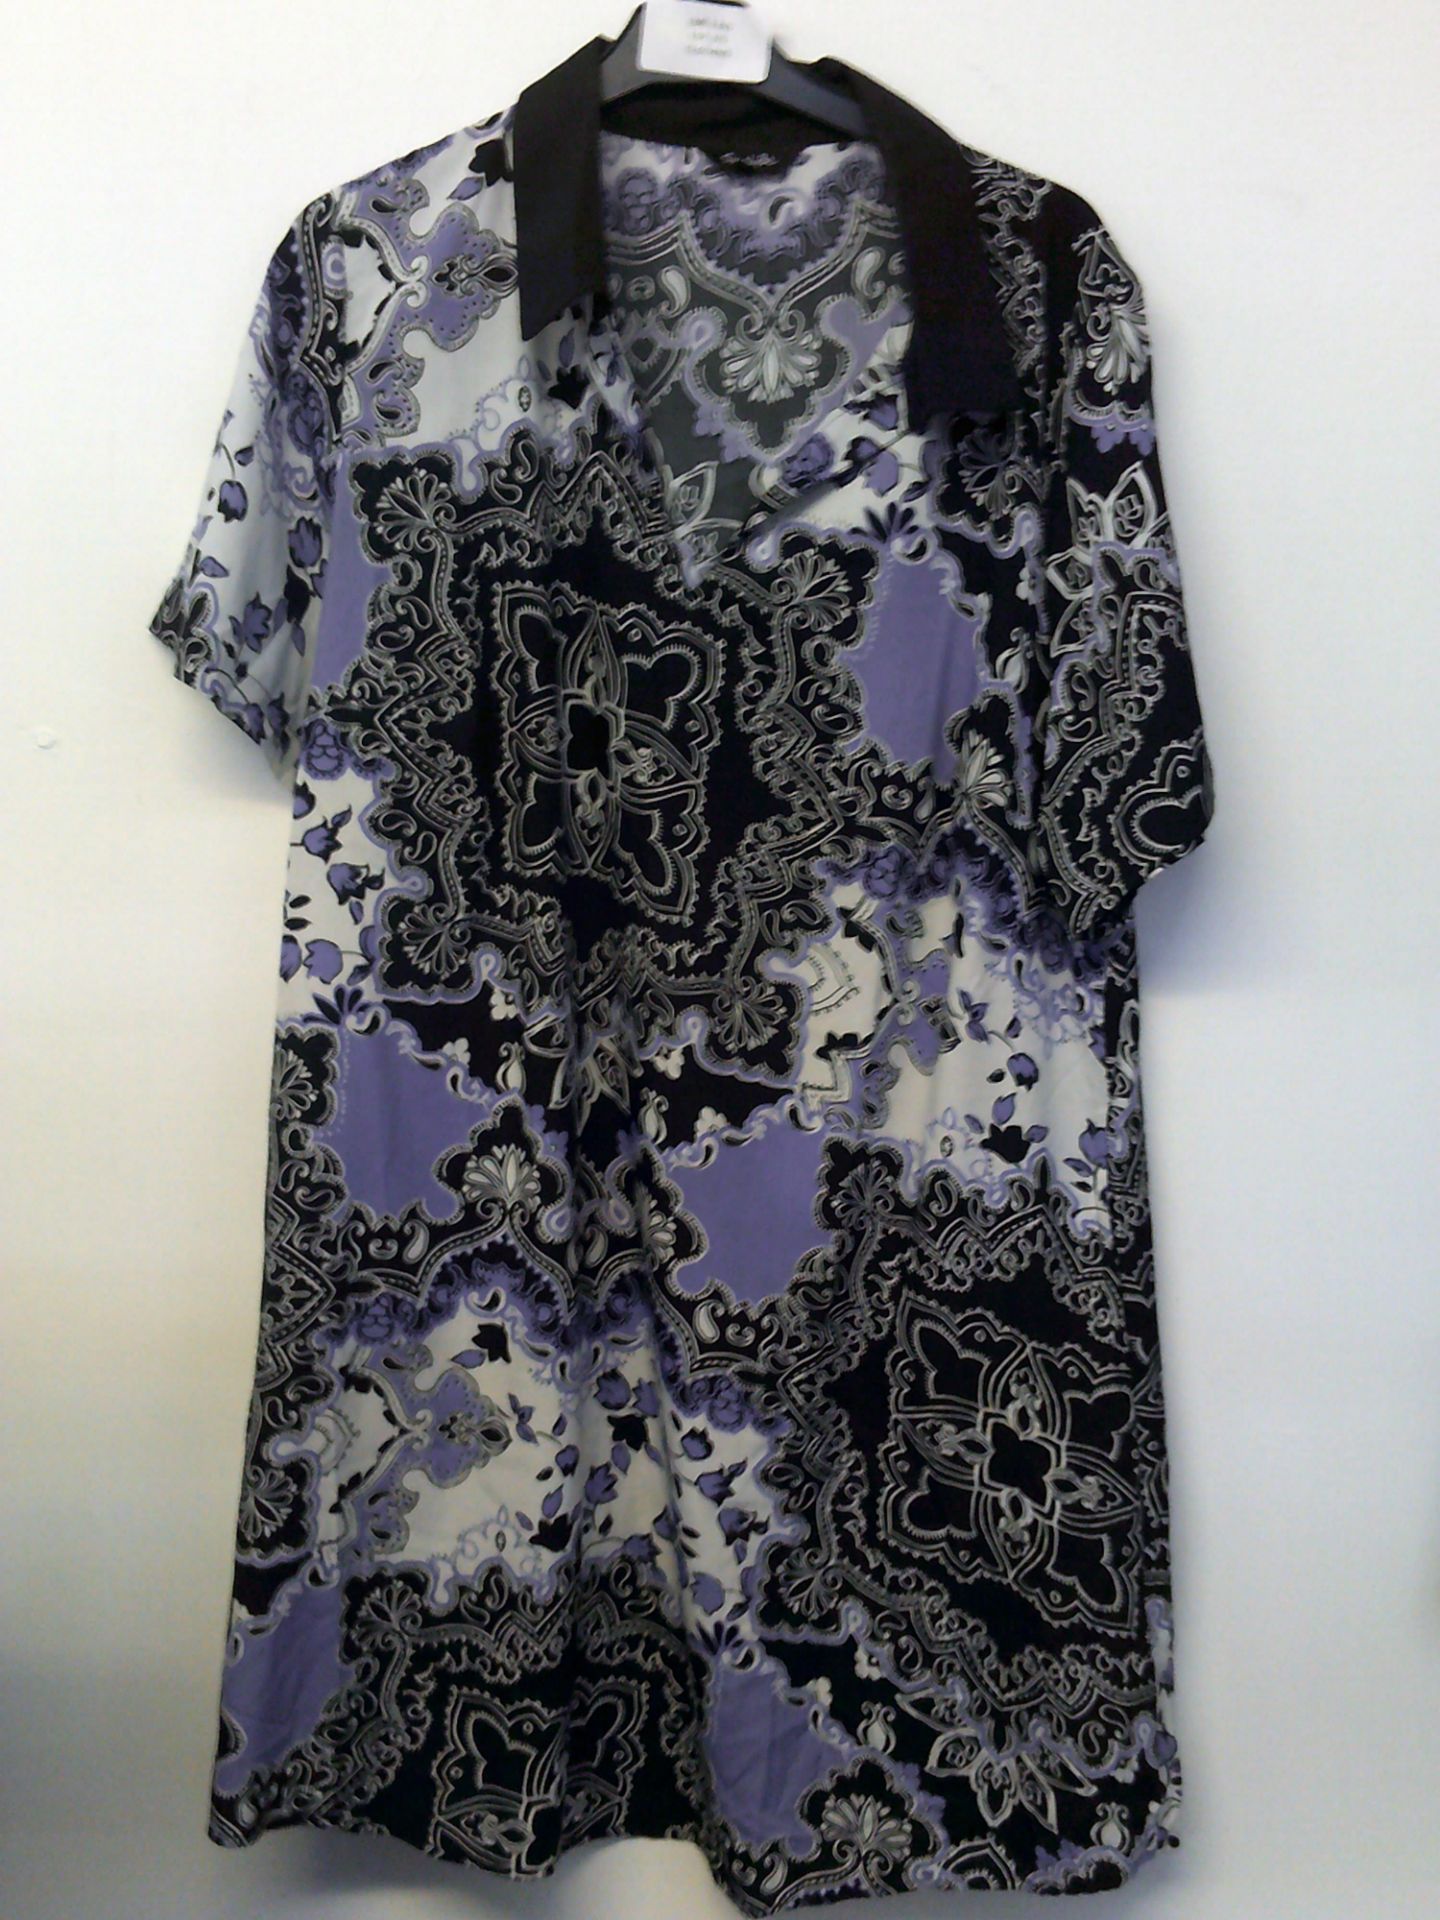 Simply Be Paisley Dress Size 18